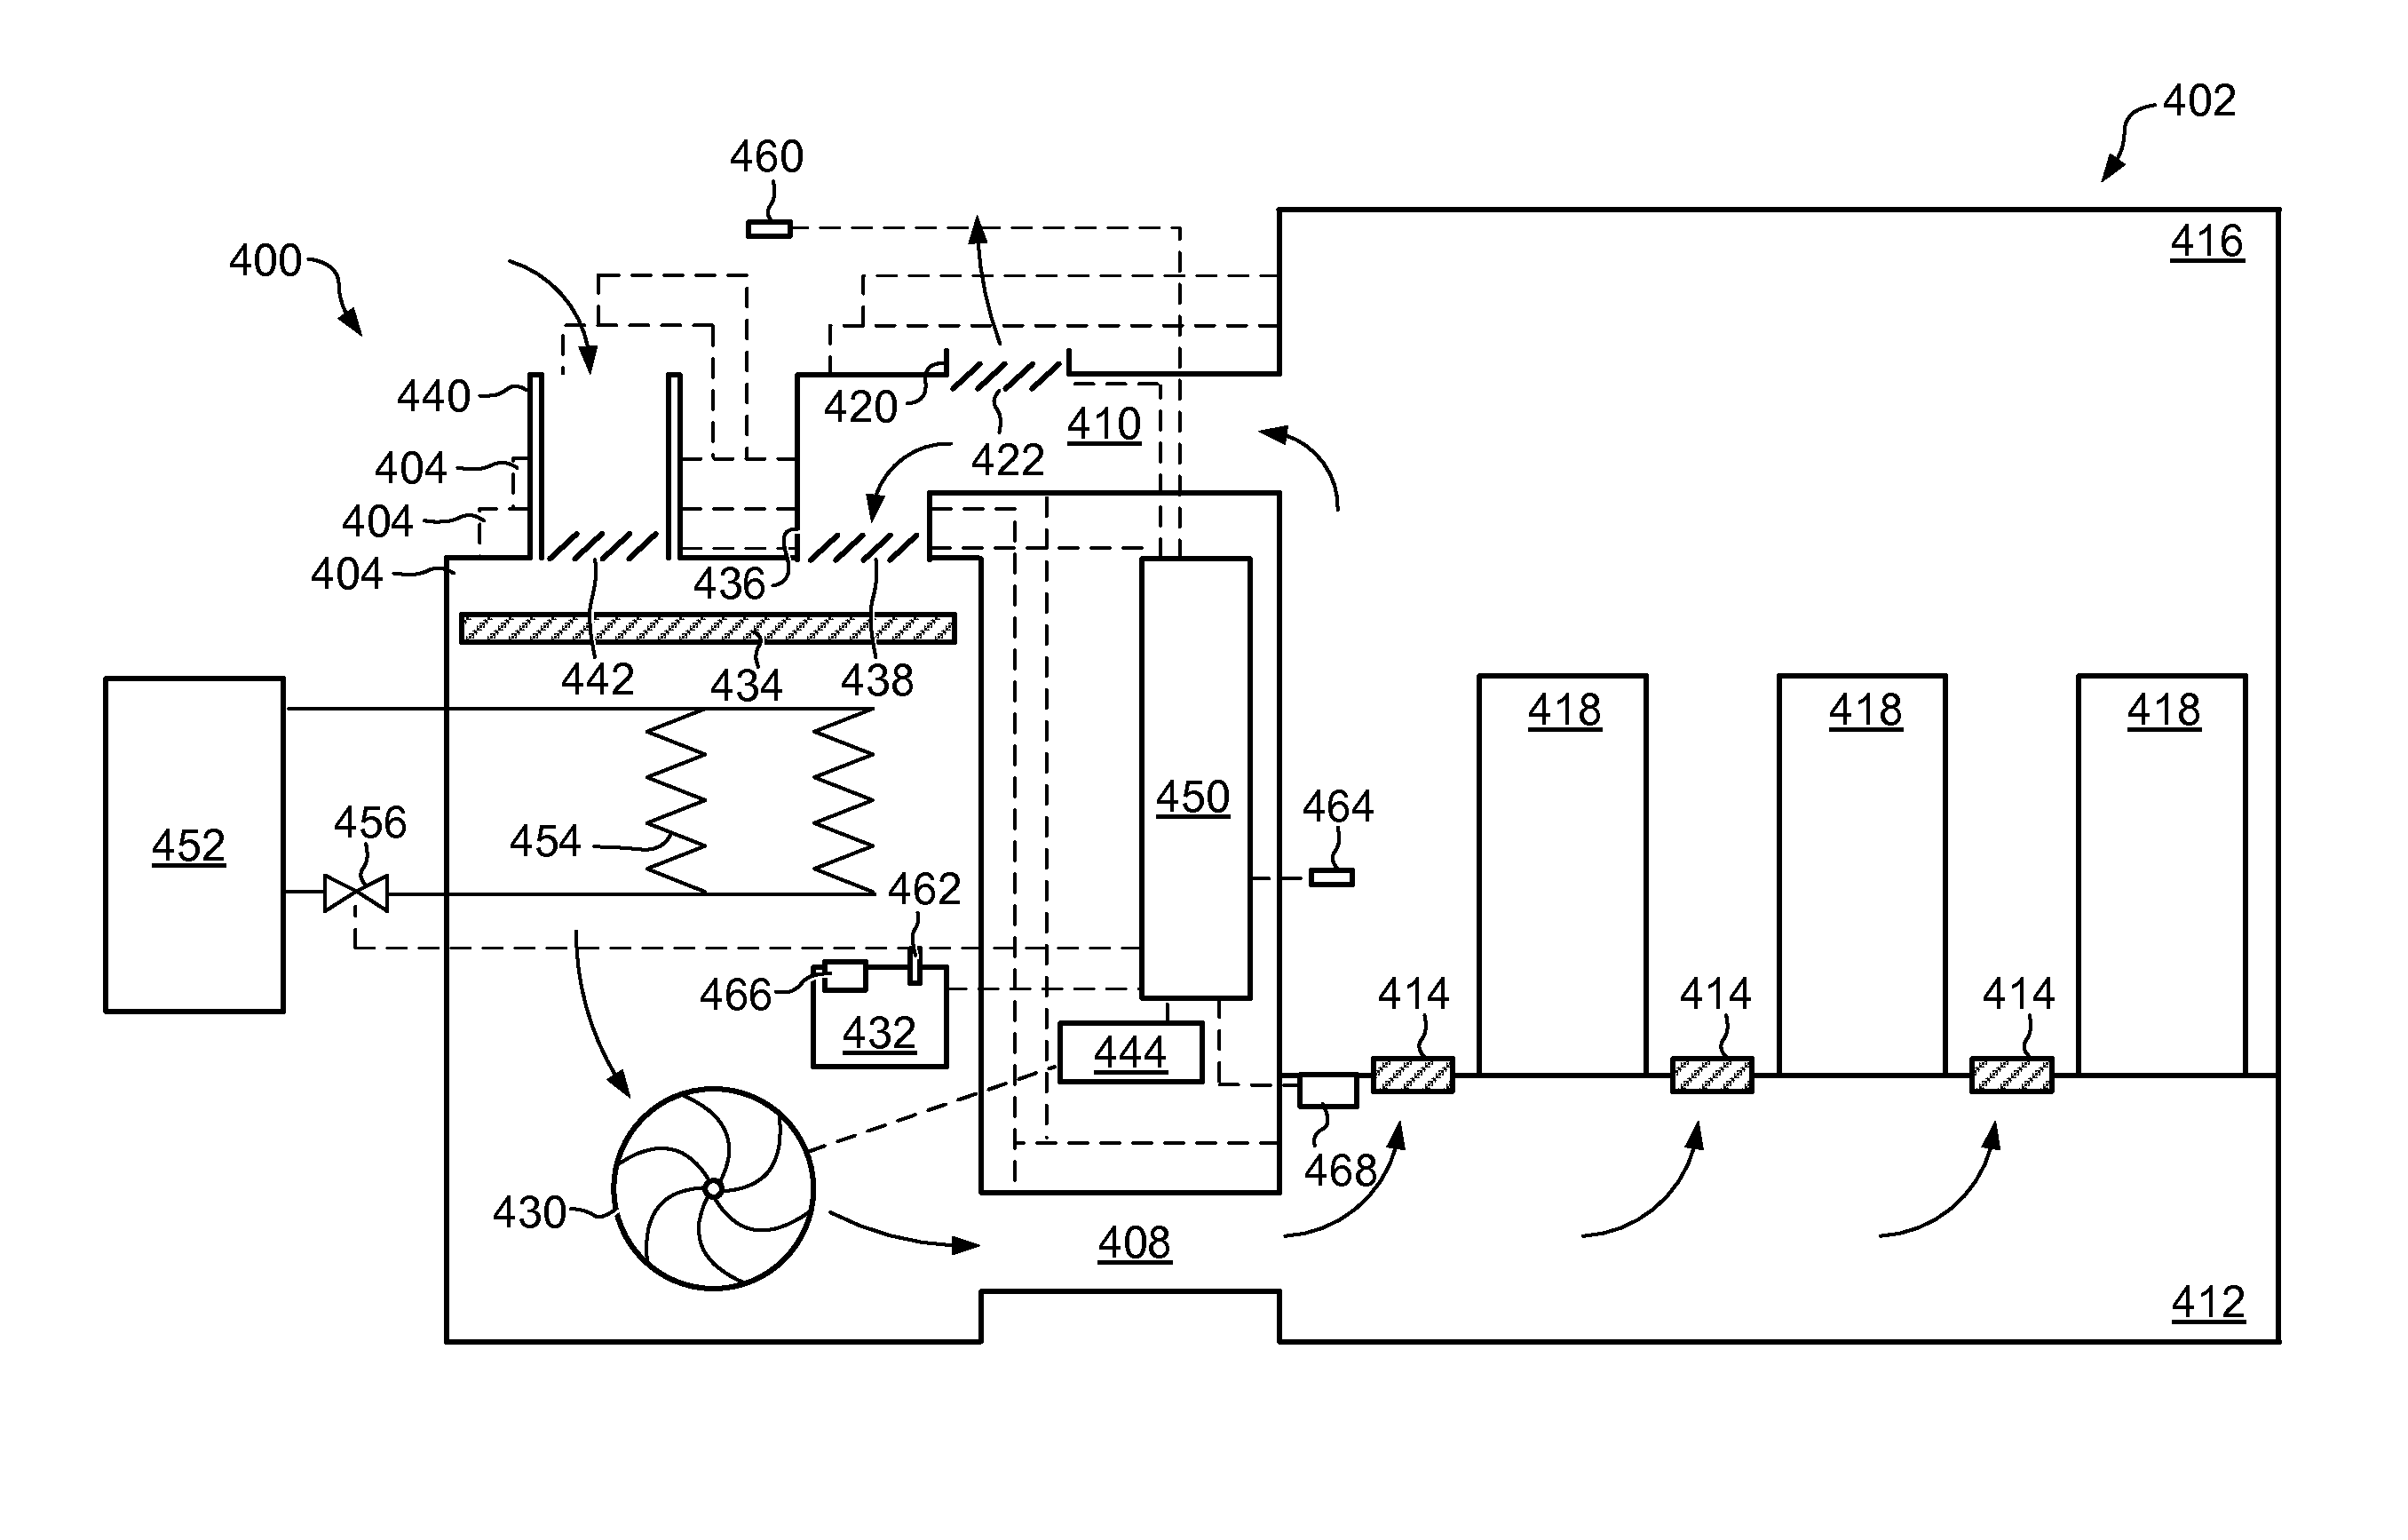 Airflow control system with external air control